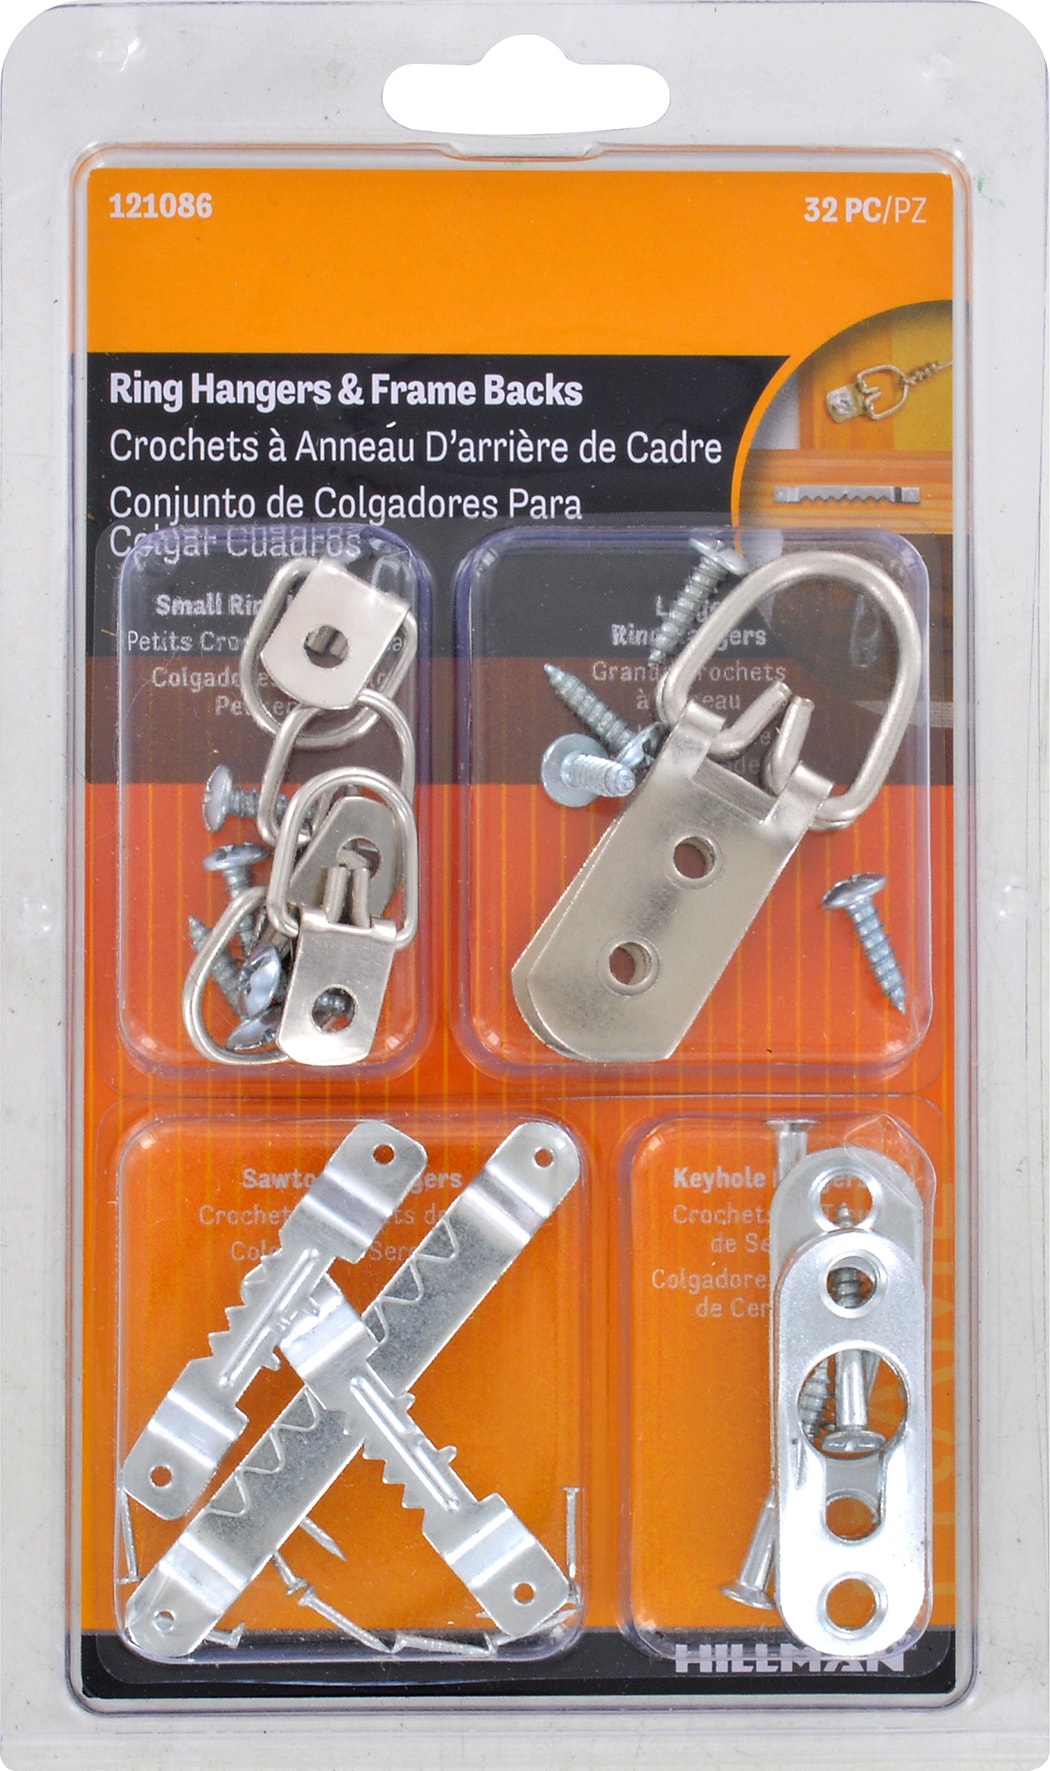 20 Pack 50 Lbs Picture Frame Hangers Hooks with Nails, Heavy Duty